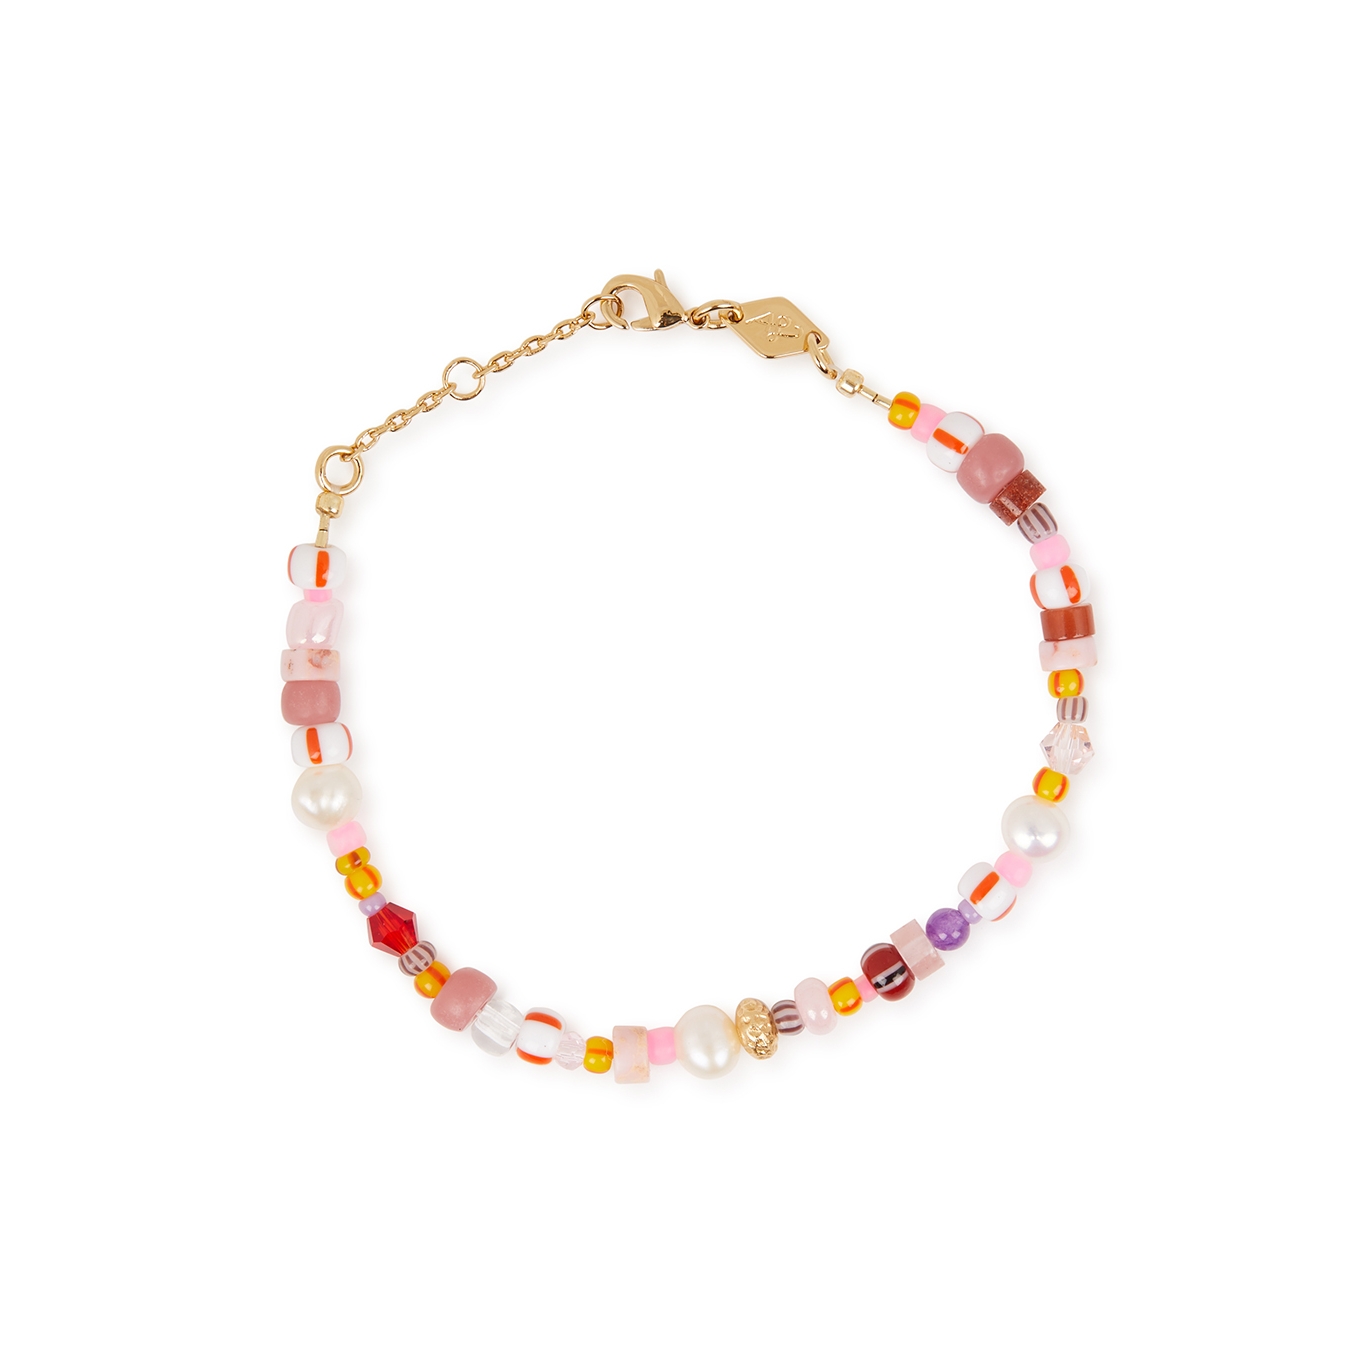 Anni LU Surf Rider 18kt Gold-plated Beaded Bracelet - Pink - One Size